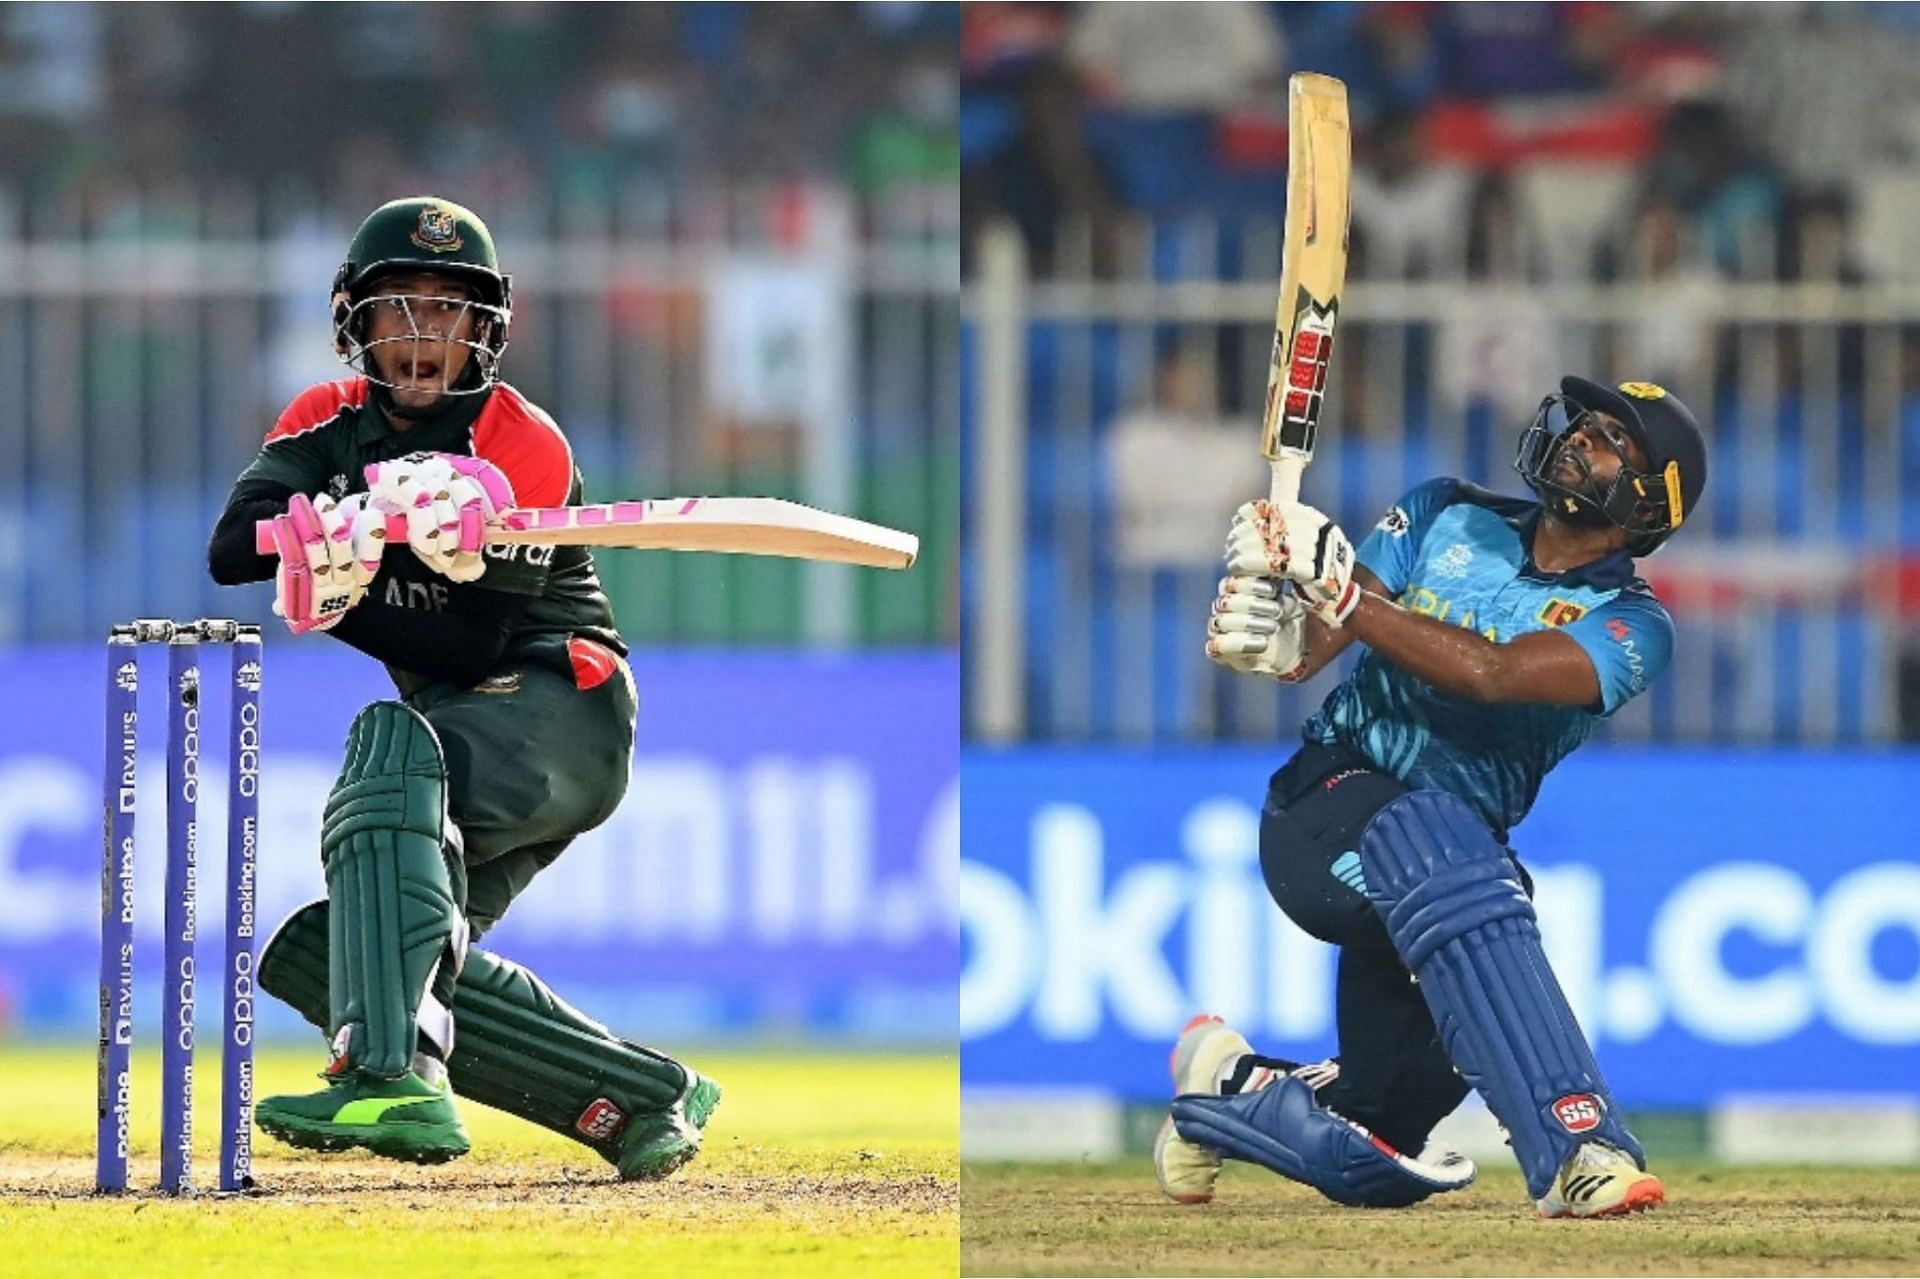 Sri Lanka and Bangladesh will square off in a must win encounter on September 1